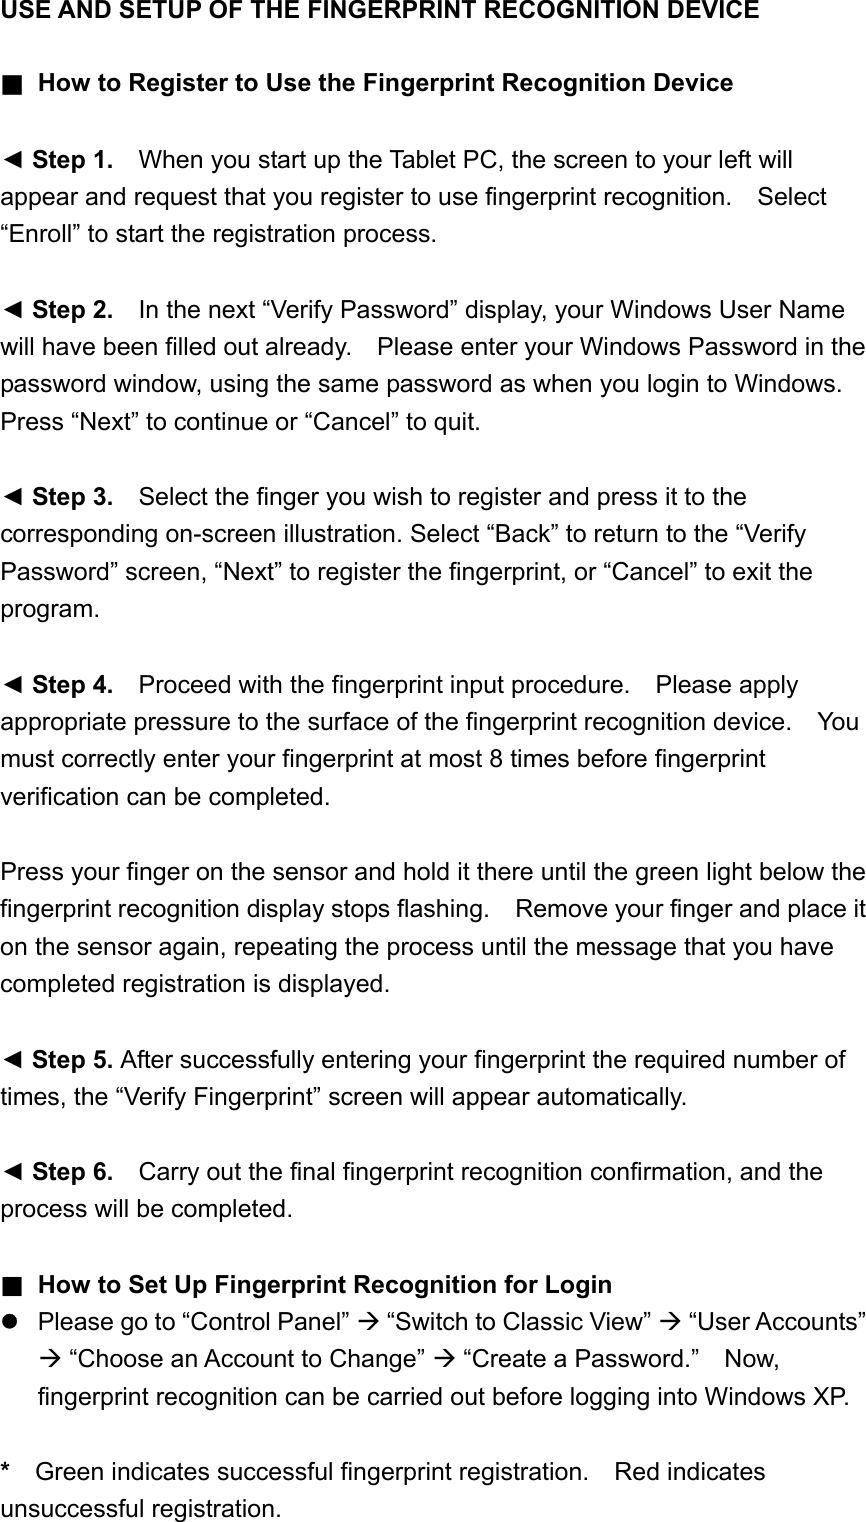 USE AND SETUP OF THE FINGERPRINT RECOGNITION DEVICE   ■  How to Register to Use the Fingerprint Recognition Device  ◄ Step 1.    When you start up the Tablet PC, the screen to your left will appear and request that you register to use fingerprint recognition.  Select “Enroll” to start the registration process.  ◄ Step 2.    In the next “Verify Password” display, your Windows User Name will have been filled out already.    Please enter your Windows Password in the password window, using the same password as when you login to Windows.   Press “Next” to continue or “Cancel” to quit.  ◄ Step 3.    Select the finger you wish to register and press it to the corresponding on-screen illustration. Select “Back” to return to the “Verify Password” screen, “Next” to register the fingerprint, or “Cancel” to exit the program.  ◄ Step 4.    Proceed with the fingerprint input procedure.    Please apply appropriate pressure to the surface of the fingerprint recognition device.  You must correctly enter your fingerprint at most 8 times before fingerprint verification can be completed.  Press your finger on the sensor and hold it there until the green light below the fingerprint recognition display stops flashing.    Remove your finger and place it on the sensor again, repeating the process until the message that you have completed registration is displayed.  ◄ Step 5. After successfully entering your fingerprint the required number of times, the “Verify Fingerprint” screen will appear automatically.  ◄ Step 6.    Carry out the final fingerprint recognition confirmation, and the process will be completed.  ■ How to Set Up Fingerprint Recognition for Login  Please go to “Control Panel”  “Switch to Classic View”  “User Accounts”  “Choose an Account to Change”  “Create a Password.”    Now, fingerprint recognition can be carried out before logging into Windows XP.  *    Green indicates successful fingerprint registration.  Red indicates unsuccessful registration.     